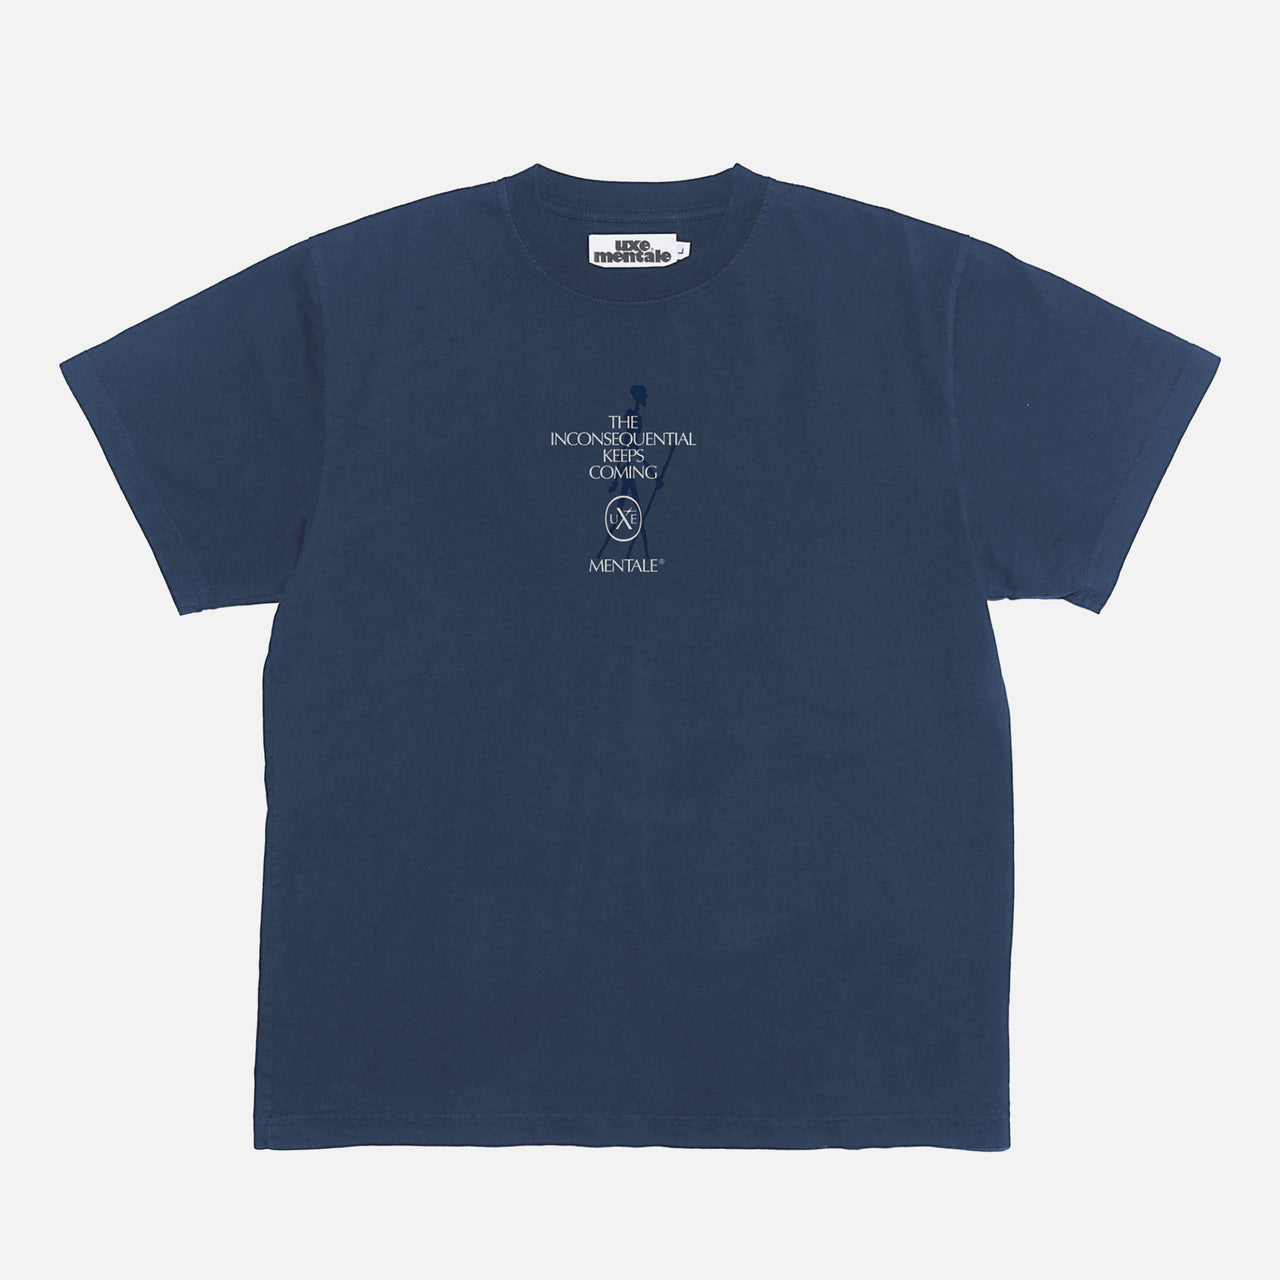 The Inconsequential T-Shirt - Washed Navy